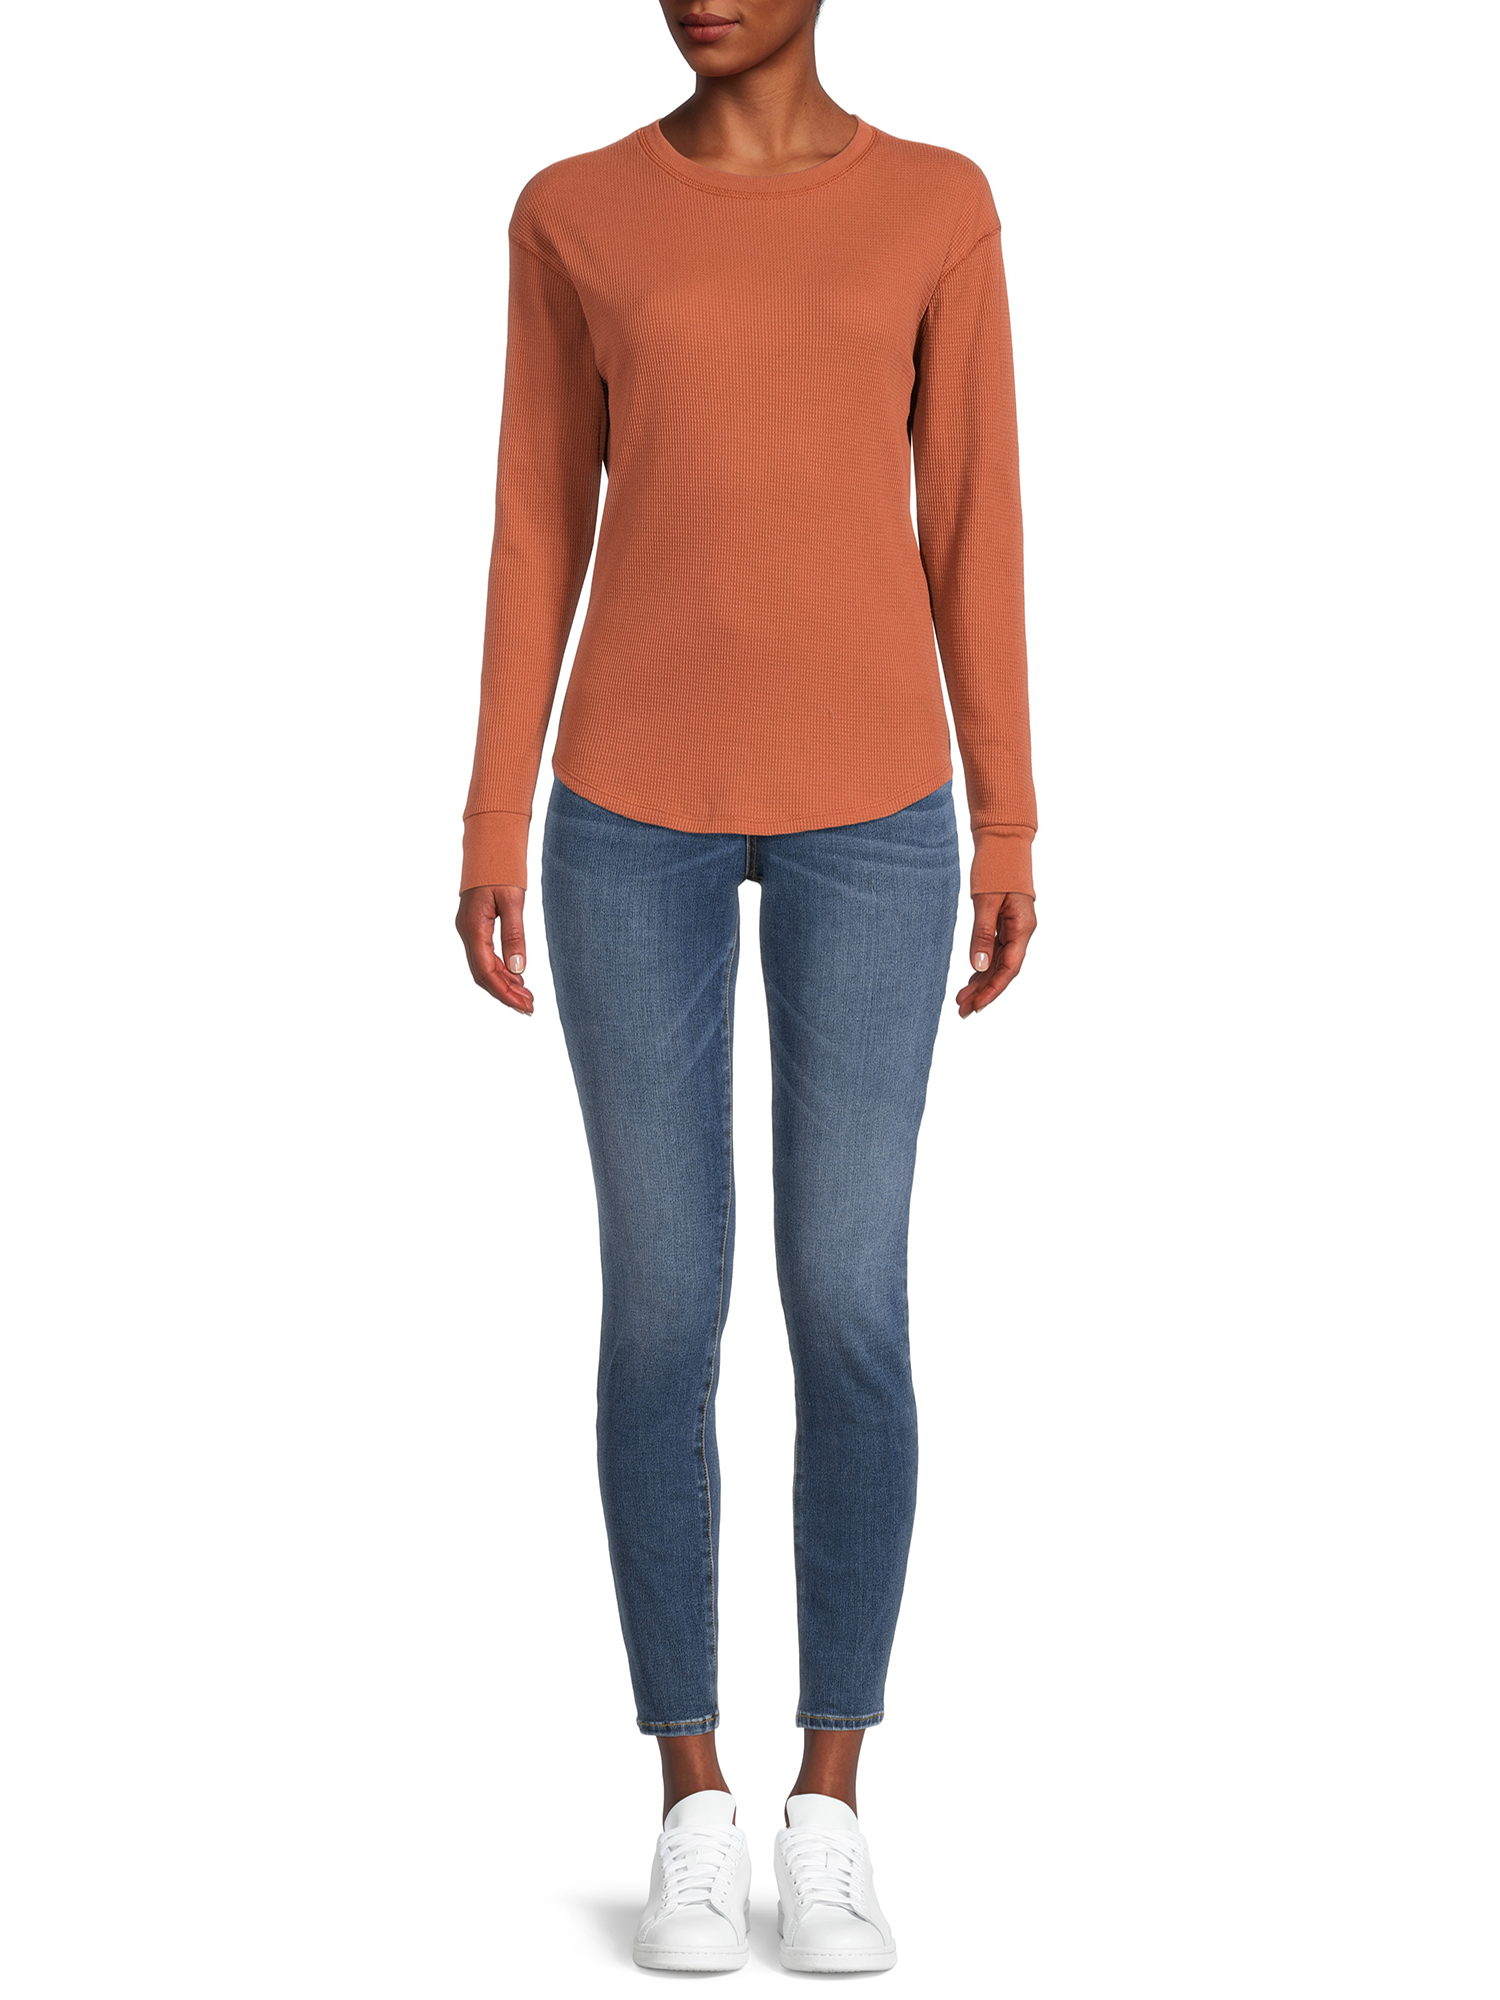 Time and Tru Women's Thermal Top with Long Sleeves - image 3 of 5